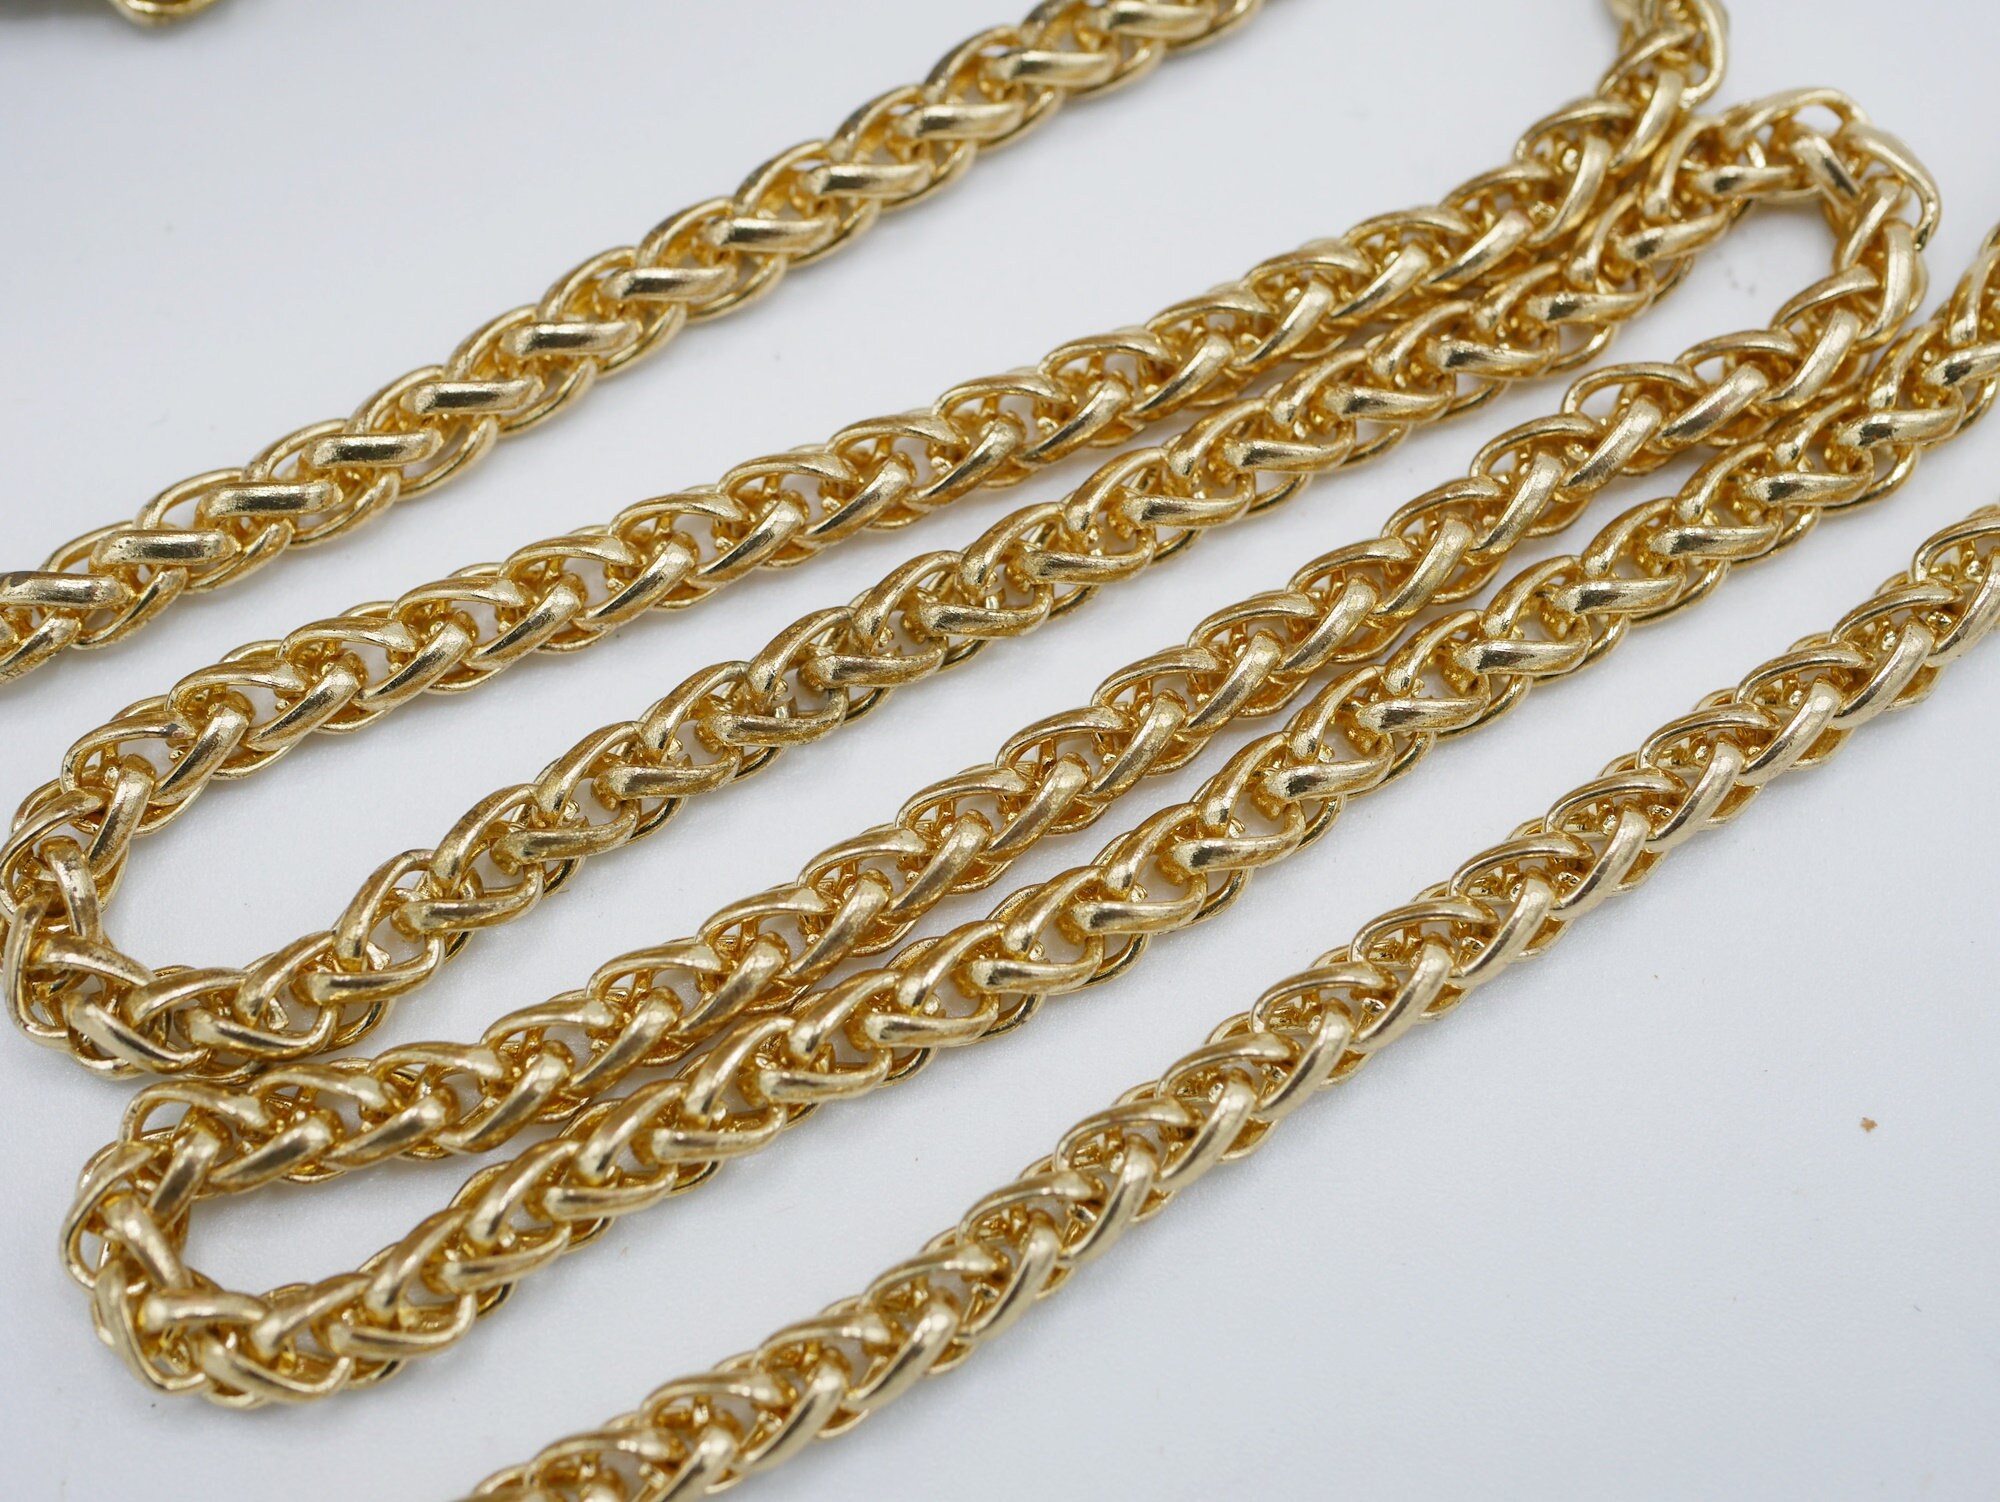 Gold Wheat Link Chain 4mm Unsoldered Links Gold Chain Sold by | Etsy